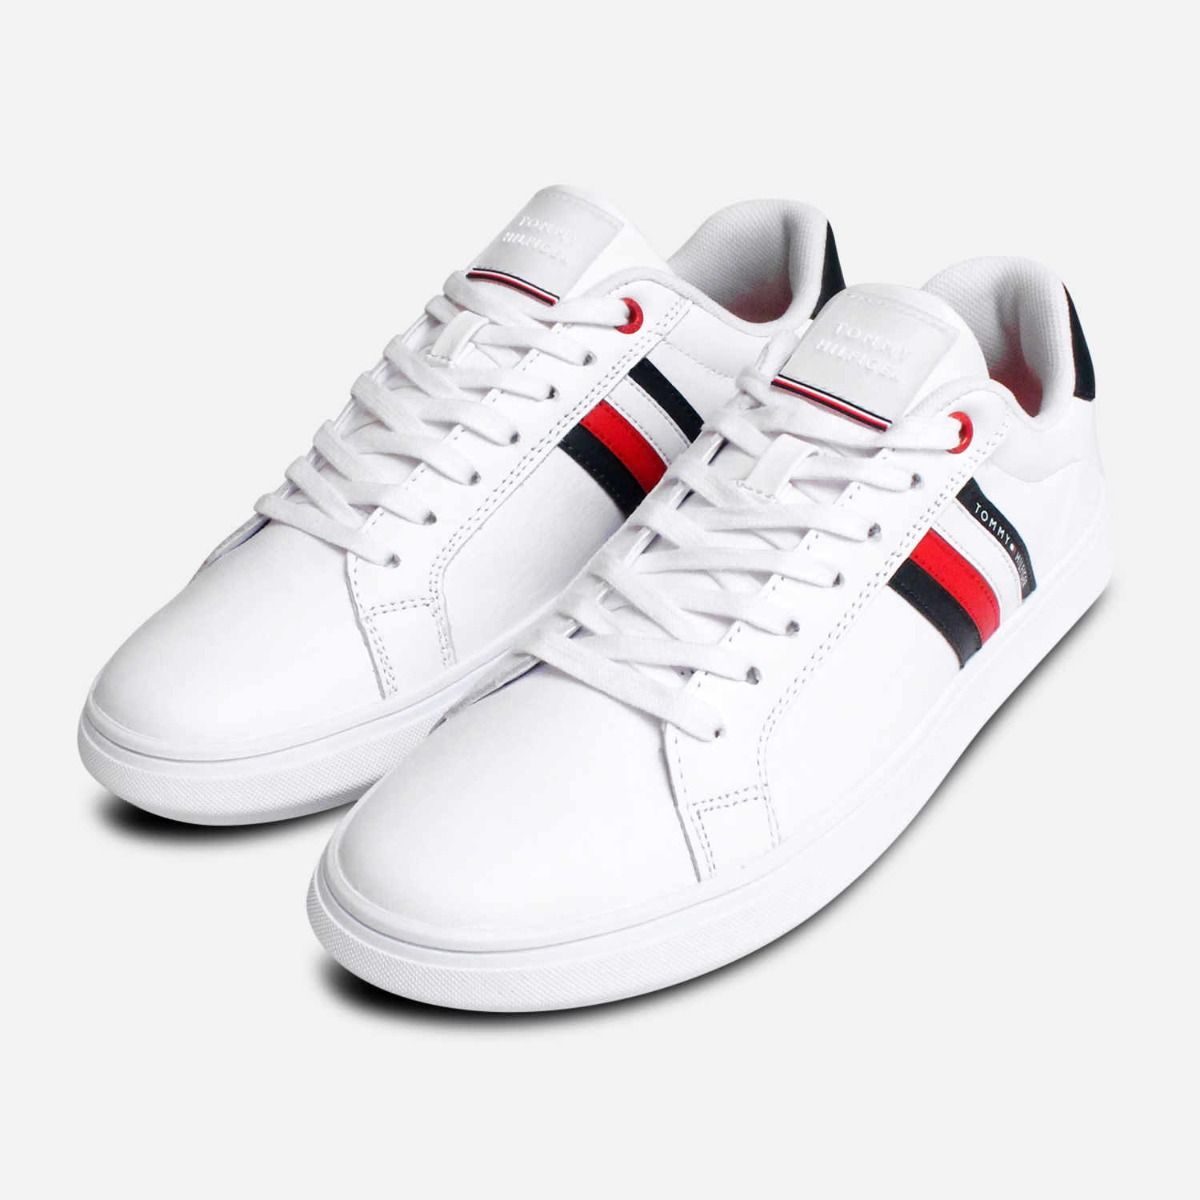 Luxury Tommy Hilfiger White Lace Up Cupsole Shoes